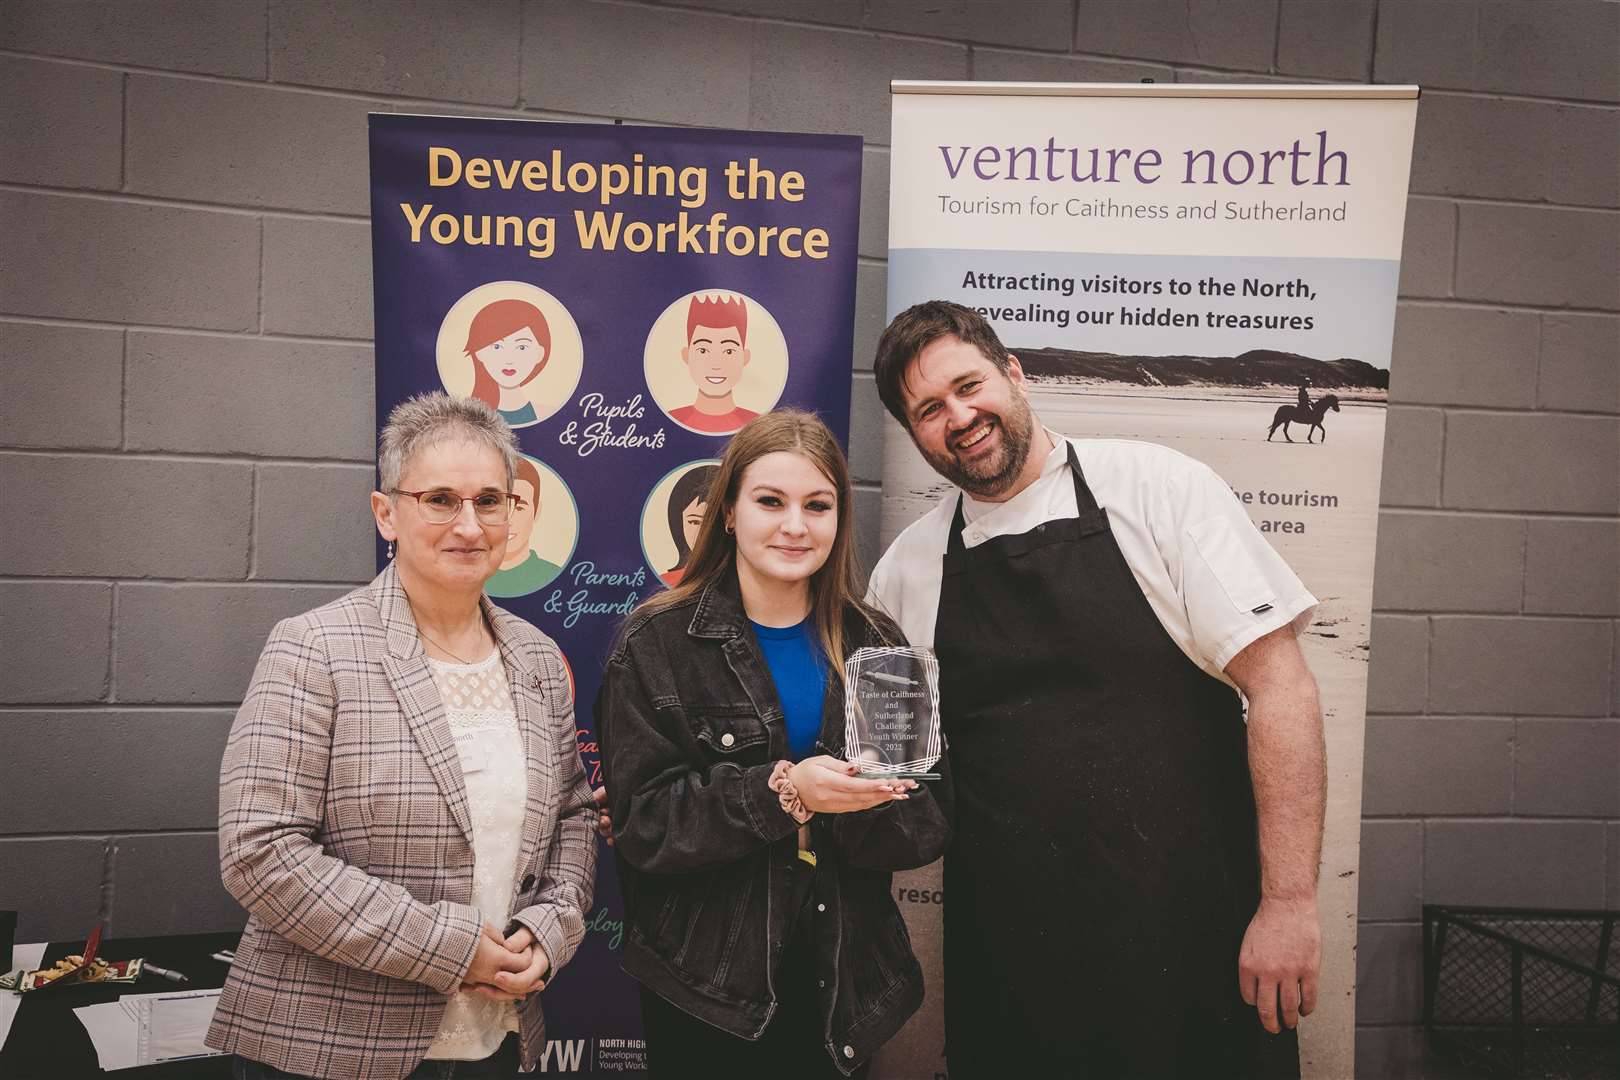 Taste North Challenge youth winner Iona Simpson with chef Grant Macnicol and Venture North director Trudy Morris, of Caithness Chamber of Commerce. The challenge is supported by Developing the Young Workforce, which is managed by the chamber. Picture: Colin Campbell Photography